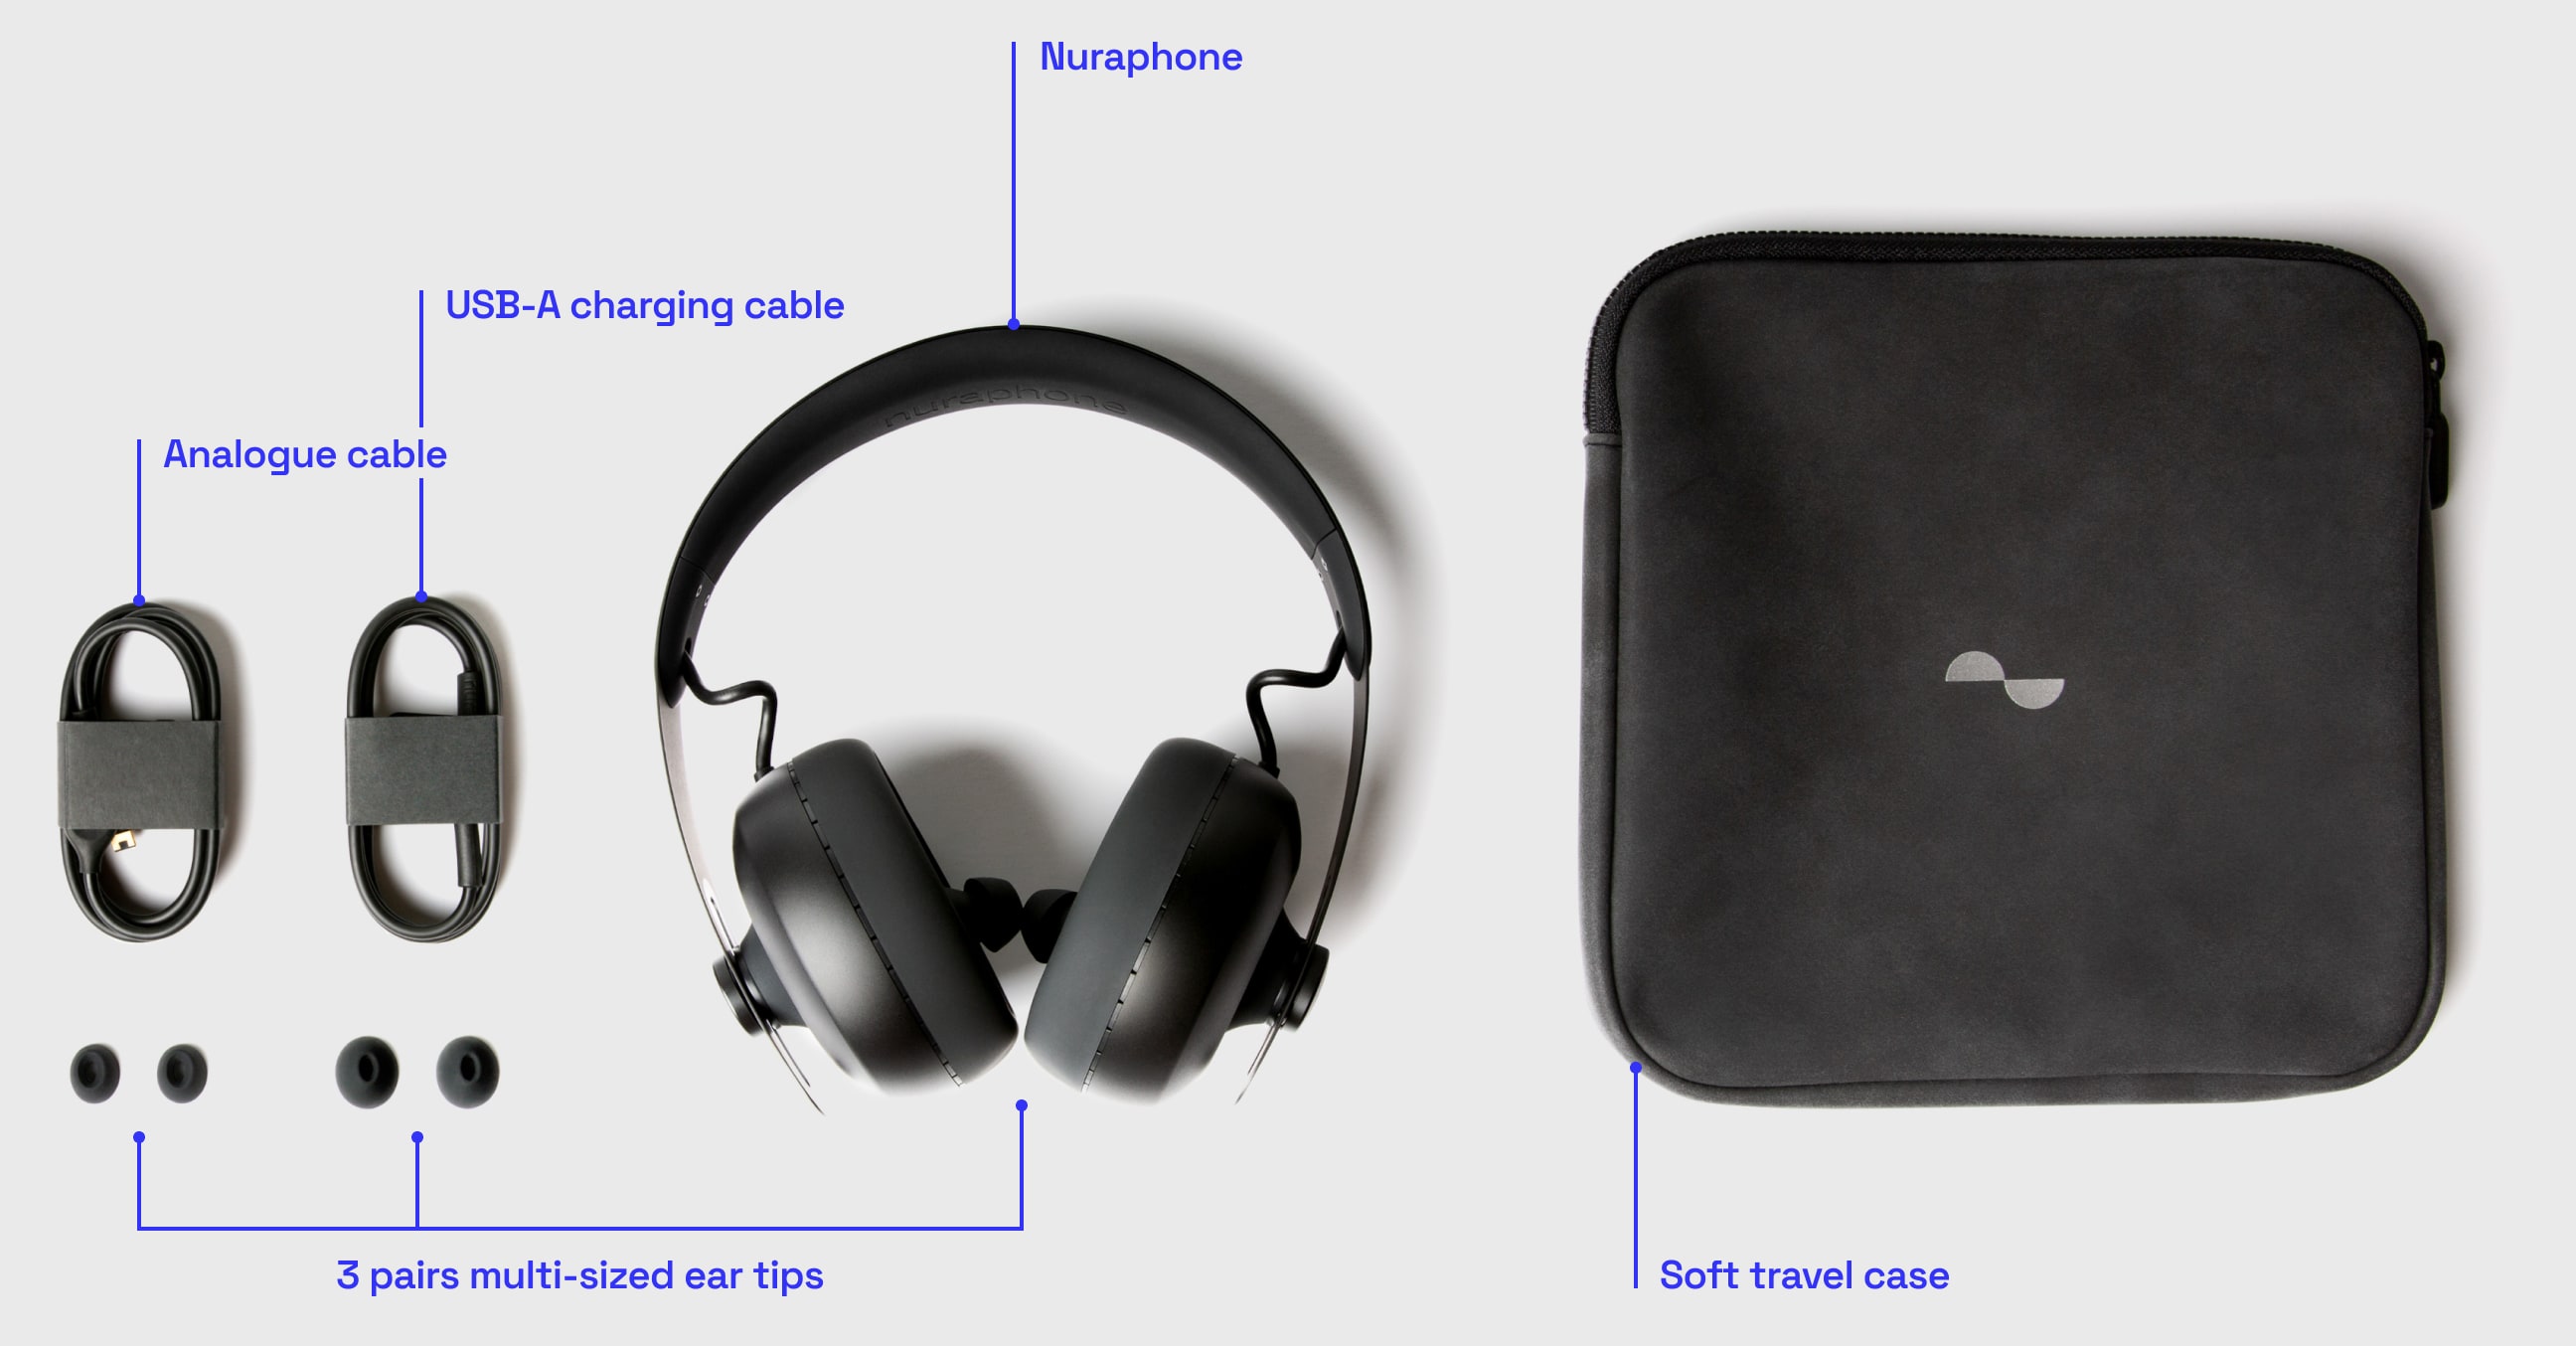 Photo of what's in the box, showing Nuraphone, soft travel case, USB-A cable, analogue cable, and 3 pairs multi-sized ear tips